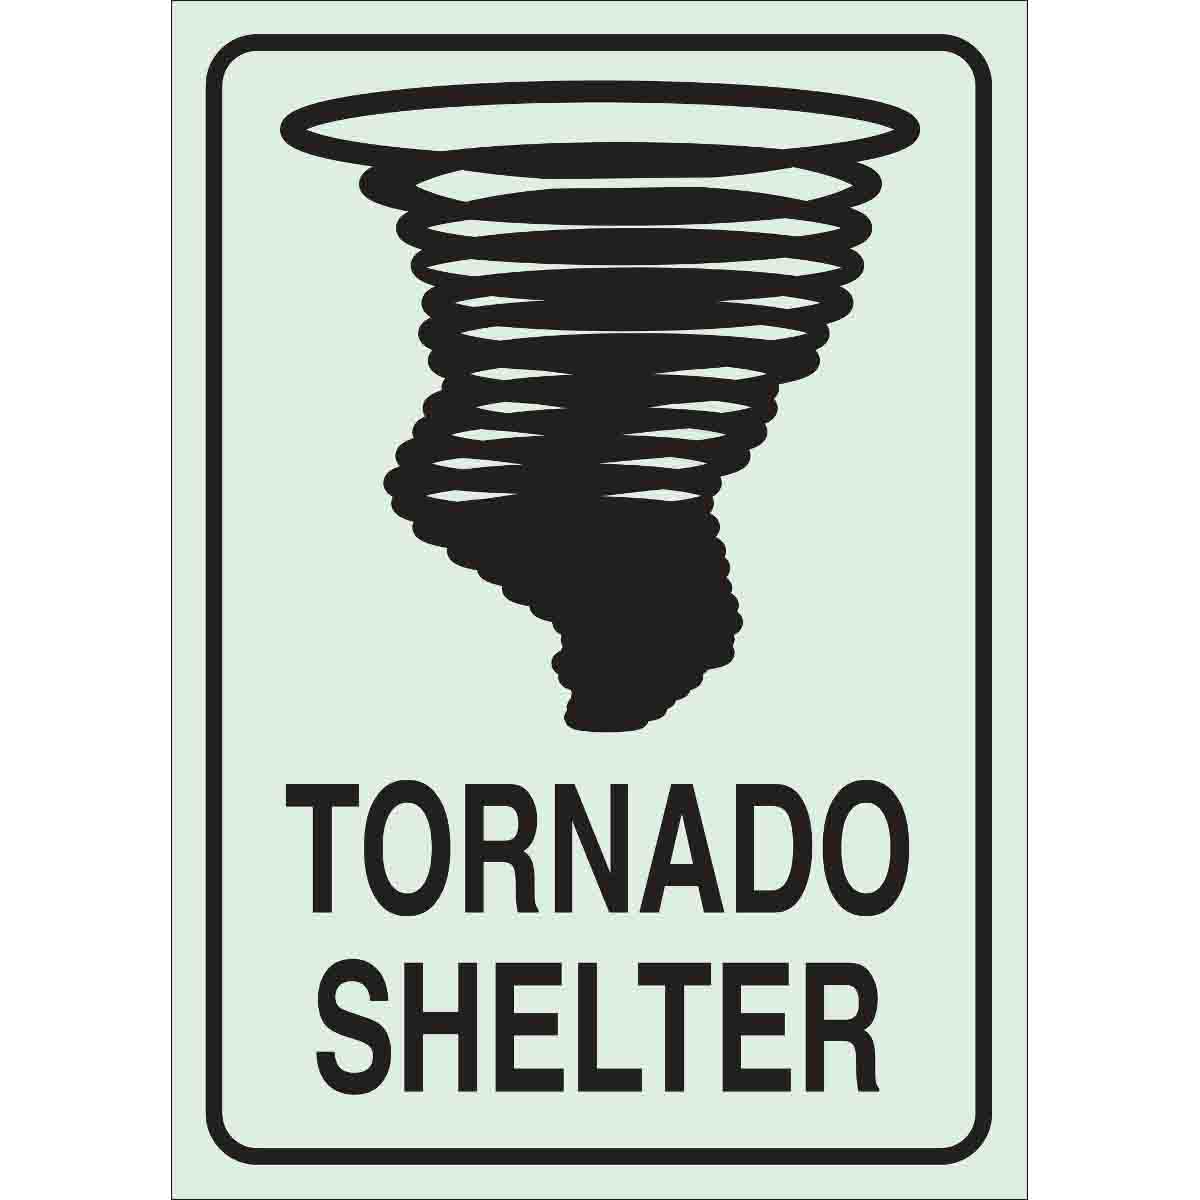 With Tornado Picto Legend Tornado Shelter 10 Width Black On Green Color Glow-In-The-Dark Exit And Directional Sign B-347 Plastic Brady 90777 14 Height 